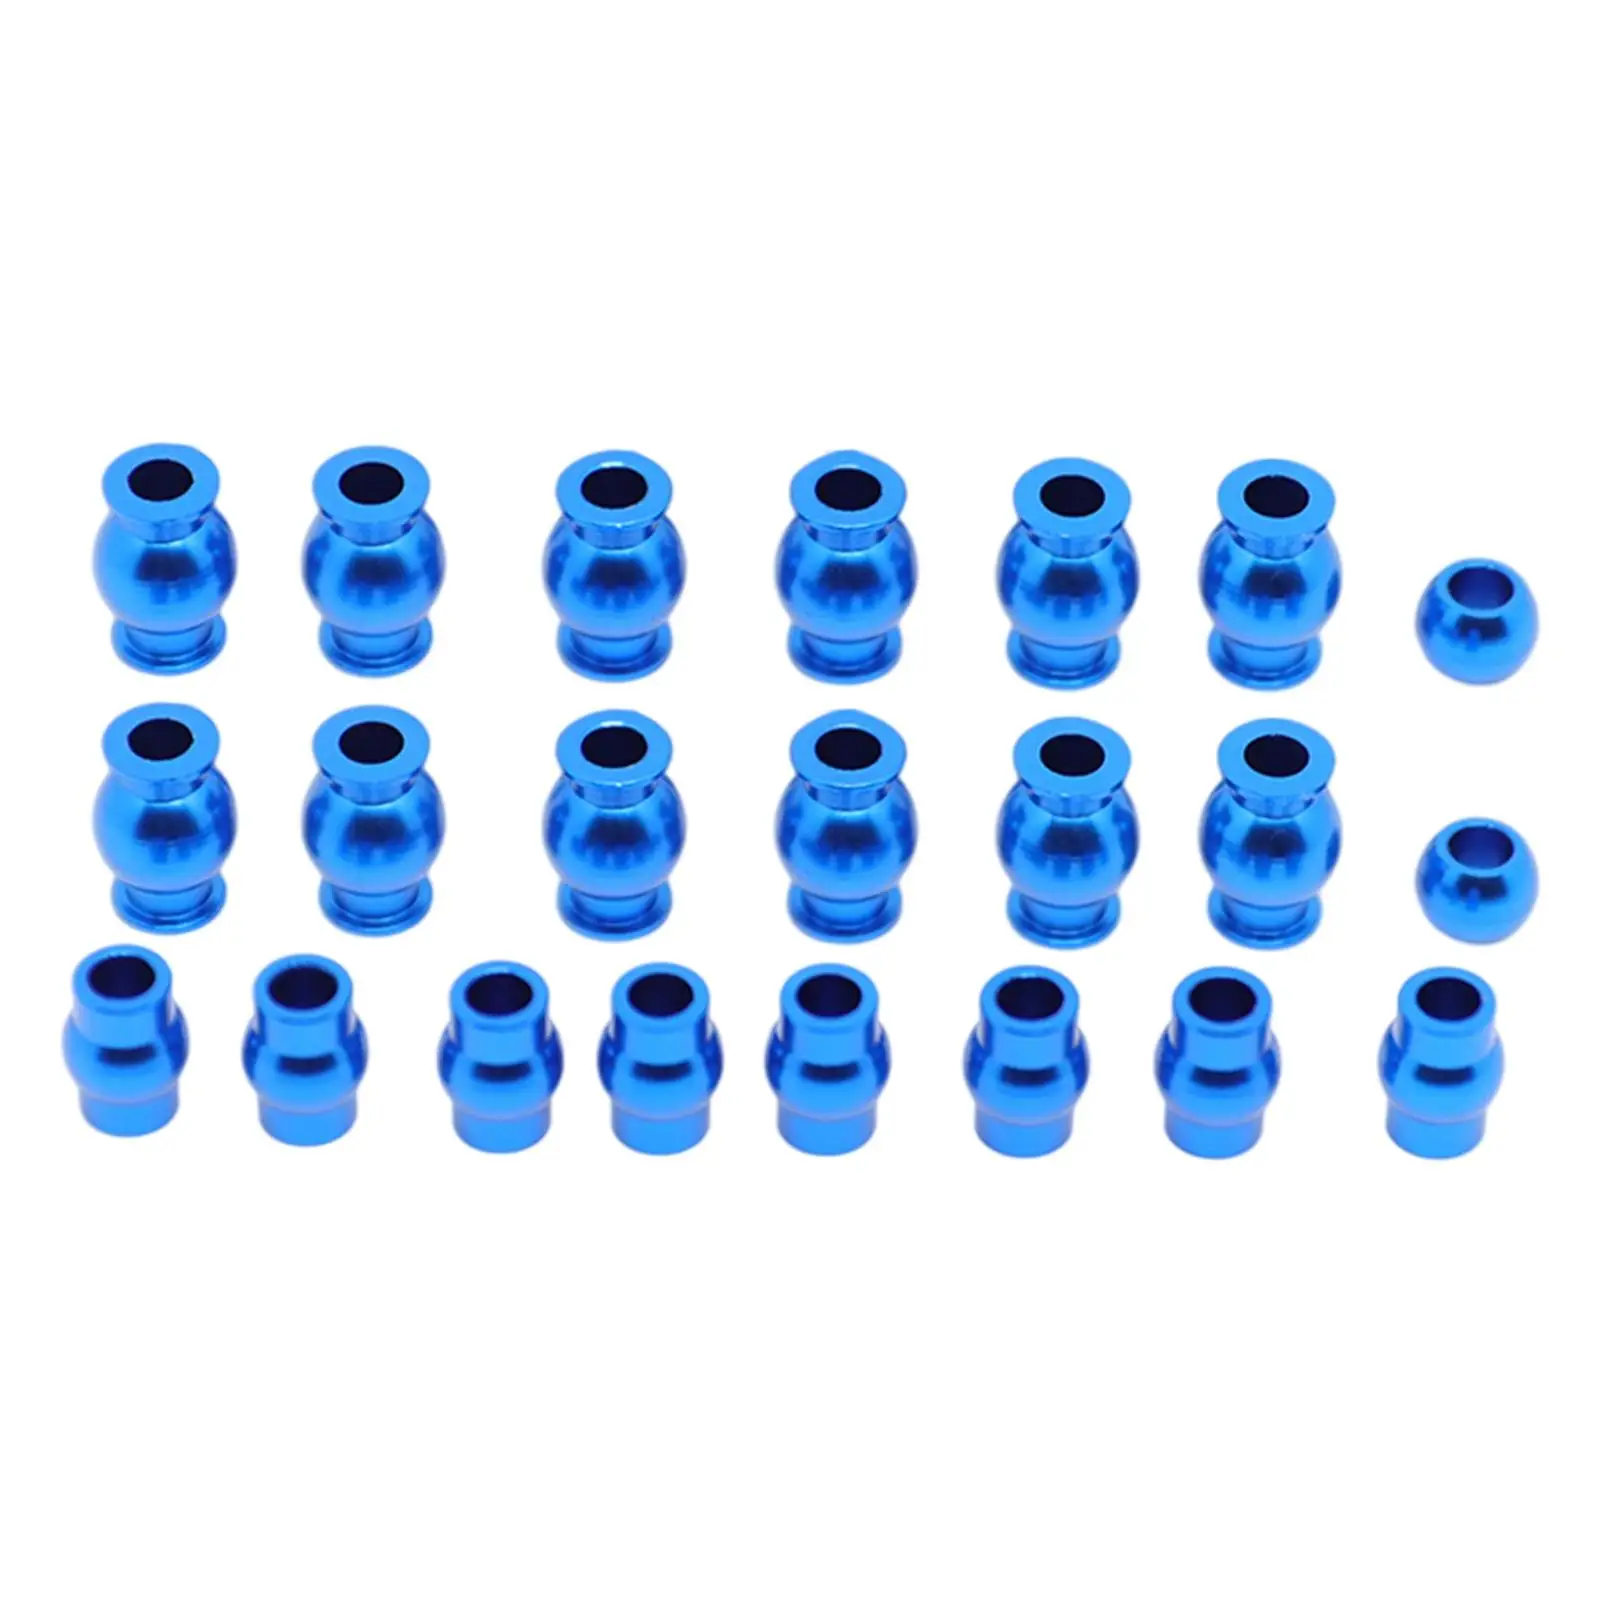 22Pcs RC Truck Ball Head for Arrma Big Rock Senton Typhon 4X4 3S BLX Brushless 1/10 Truck Electric Toy Accessories